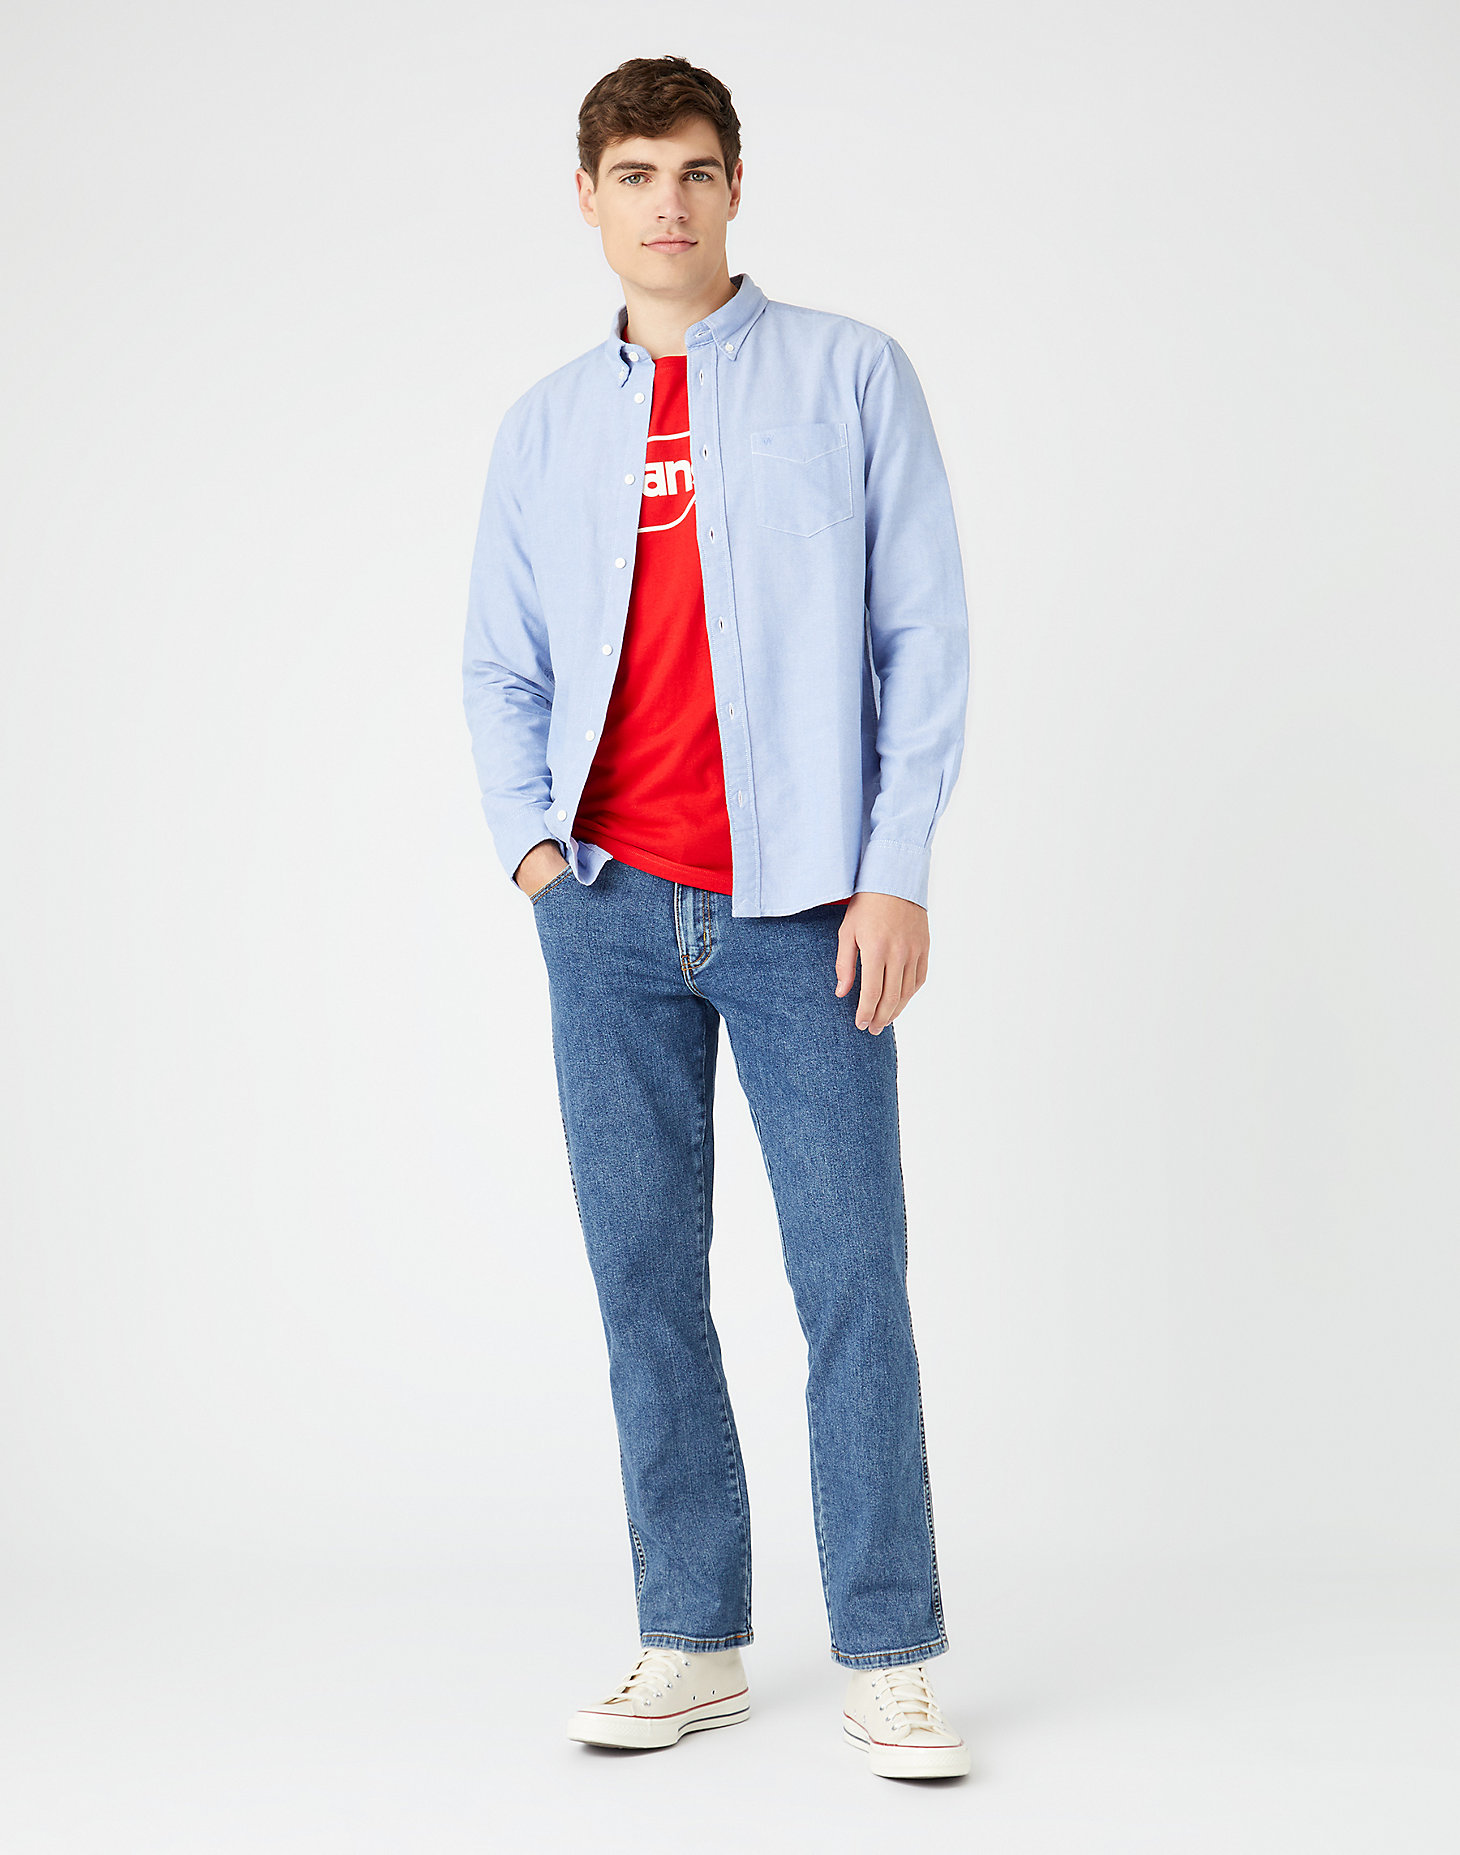 Long Sleeve One Pocket Shirt in Limoges Blue alternative view 1